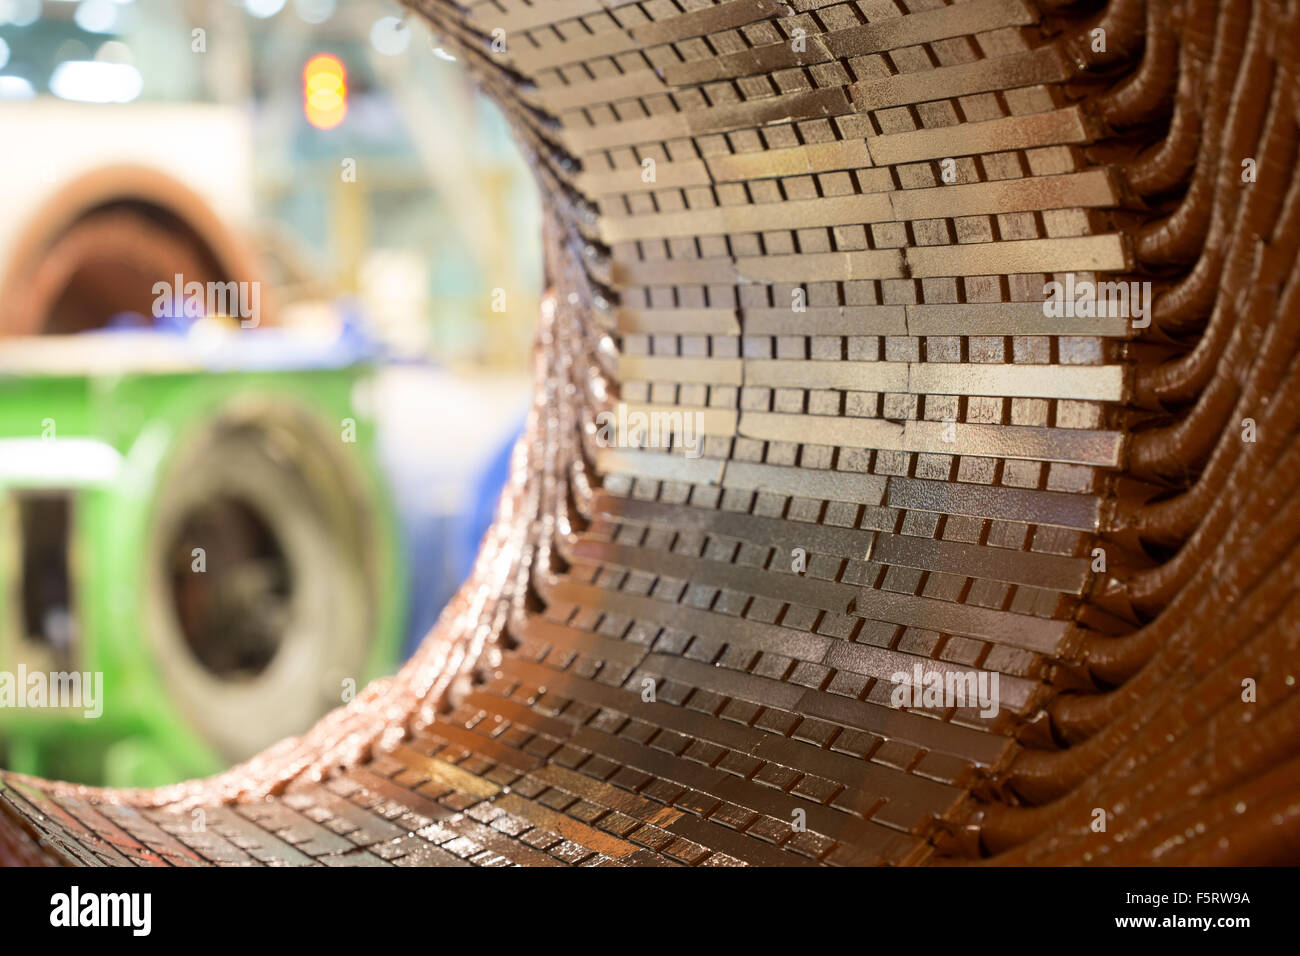 Stator of a big electric motor Stock Photo